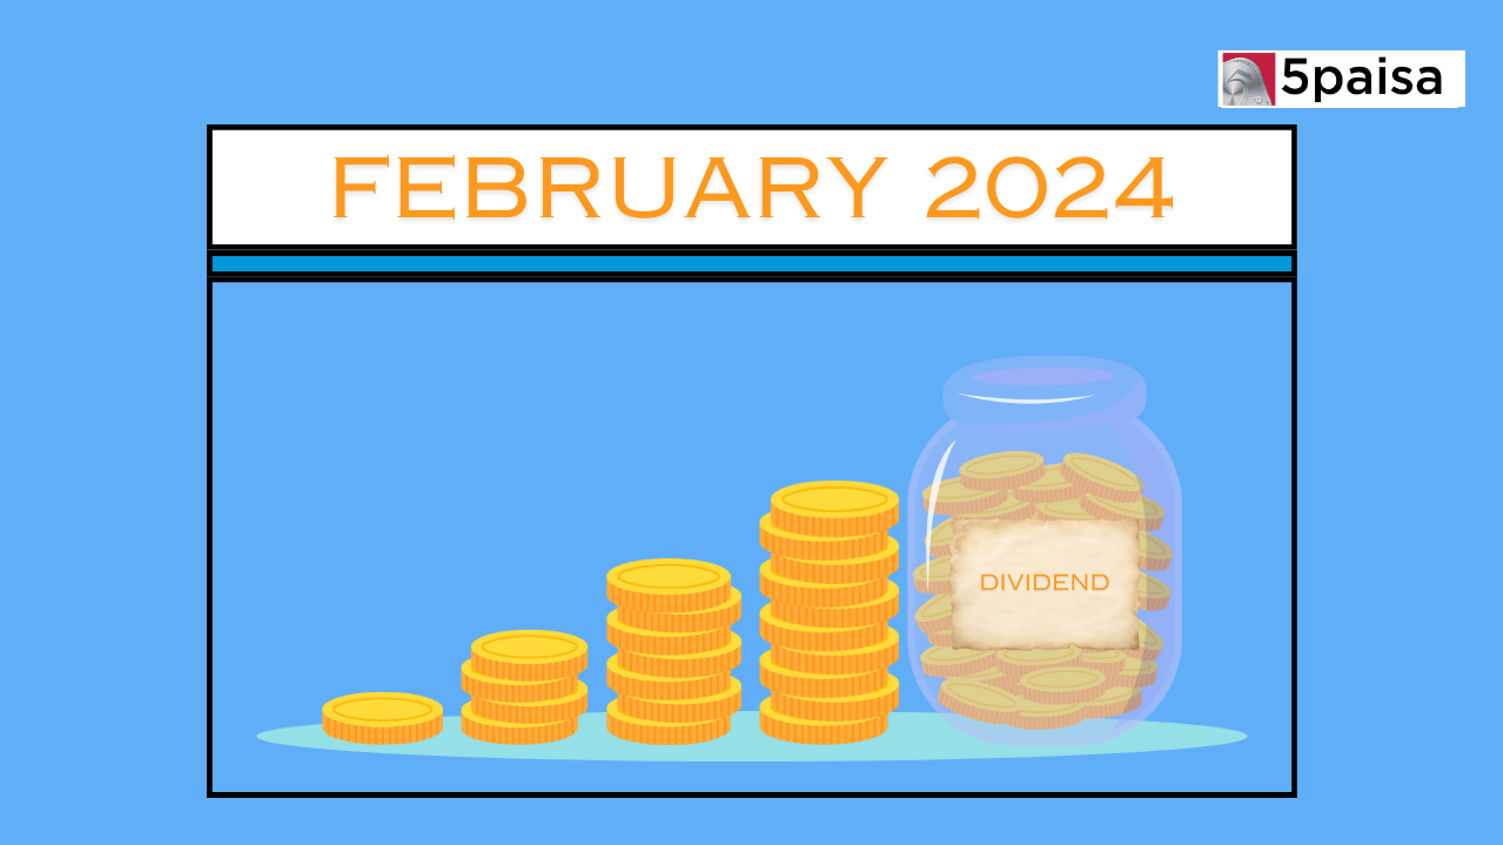 Dividends in February 2024 5paisa